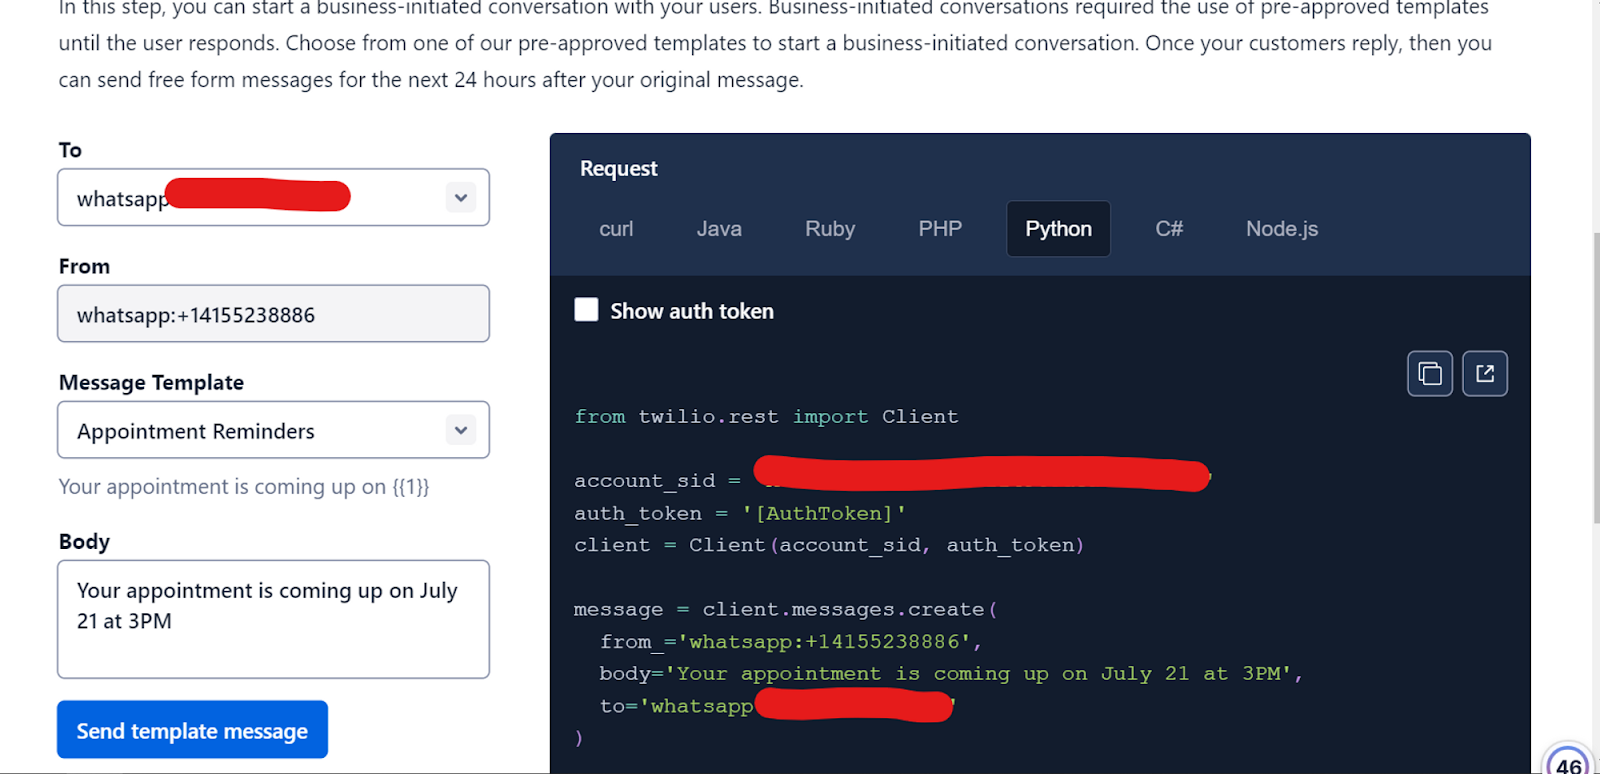 Here you can see how to connect to WhatsApp API in various languages. Currently, the image is showing how to connect to WhatsApp API so that you can send messages from Twilio.